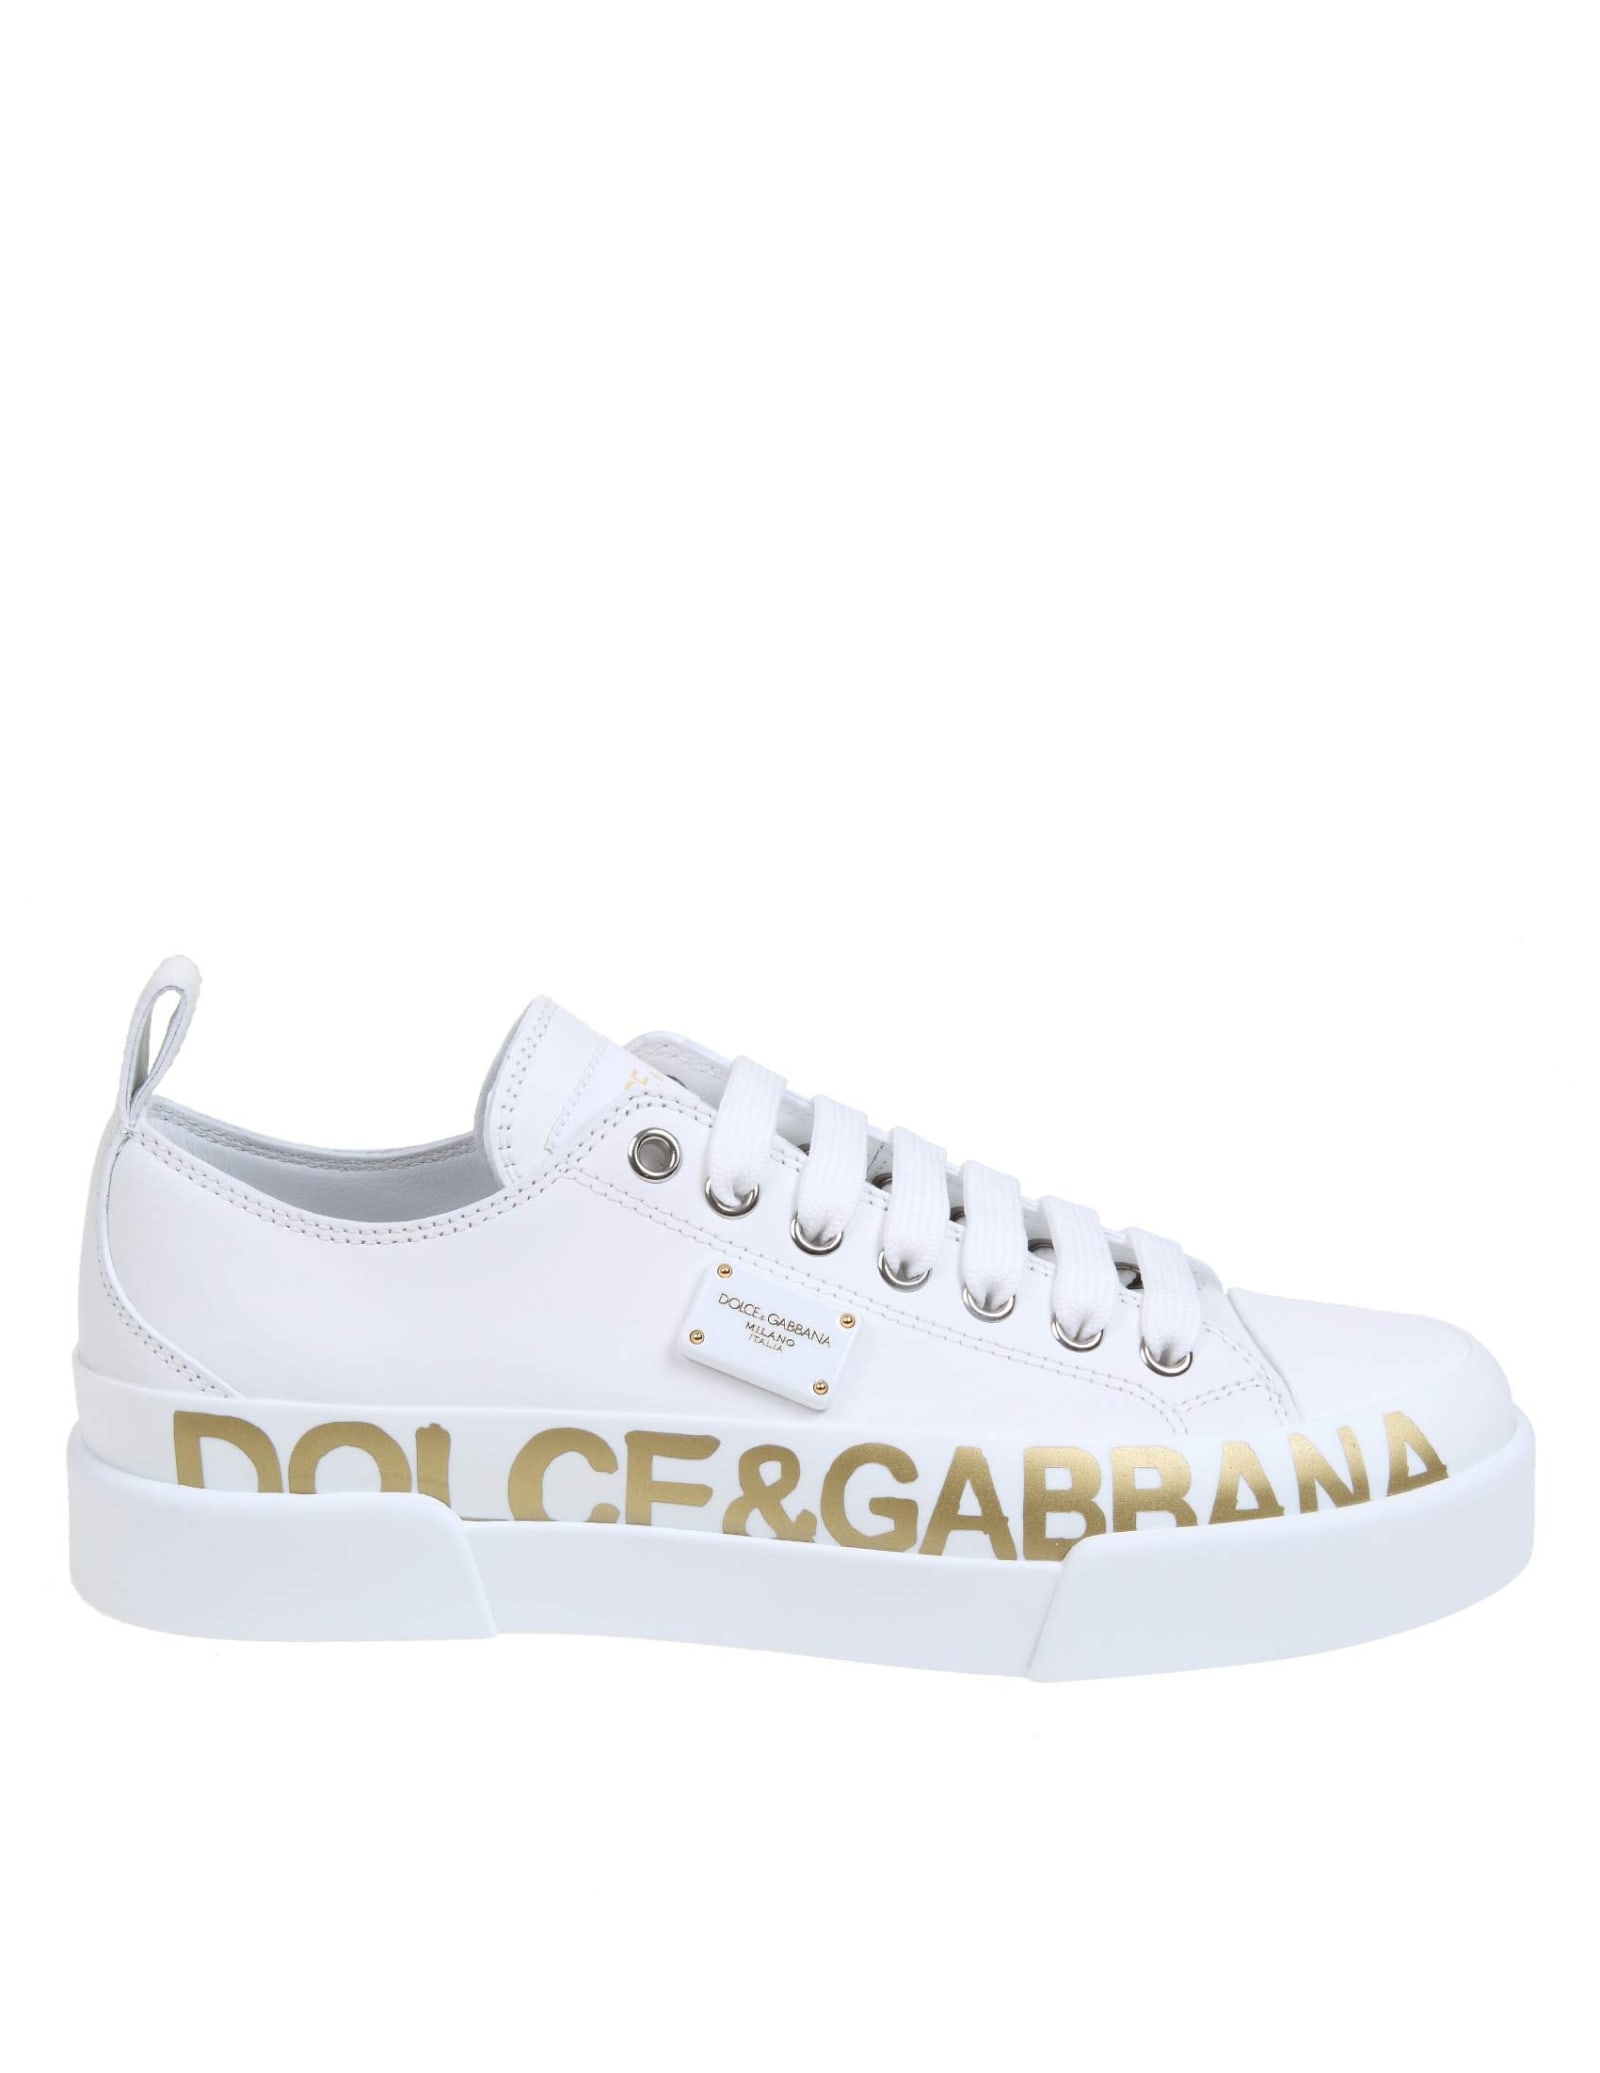 DOLCE & GABBANA SNEAKERS IN WHITE LEATHER WITH GOLD LOGO,CK1886 AO515 89642